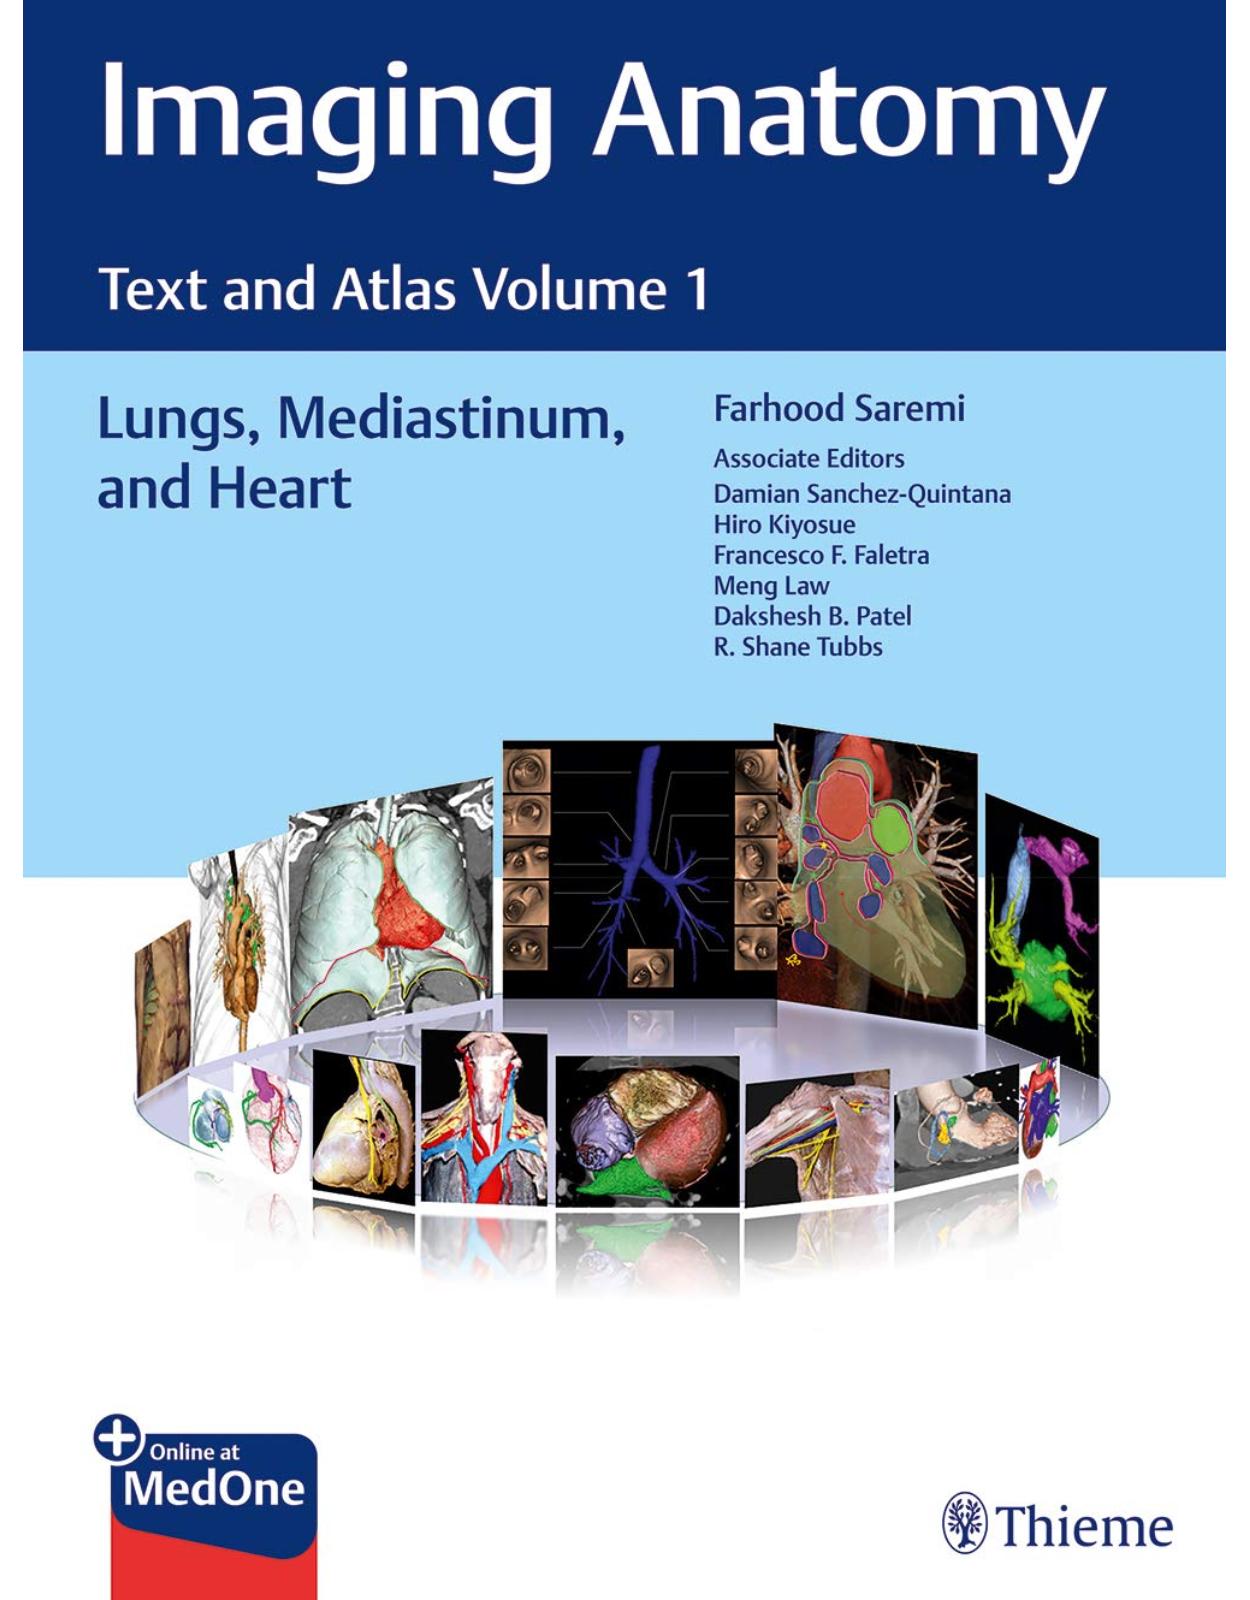 Imaging Anatomy: Text and Atlas Volume 1, Lungs, Mediastinum, and Heart (Atlas of Imaging Anatomy) 